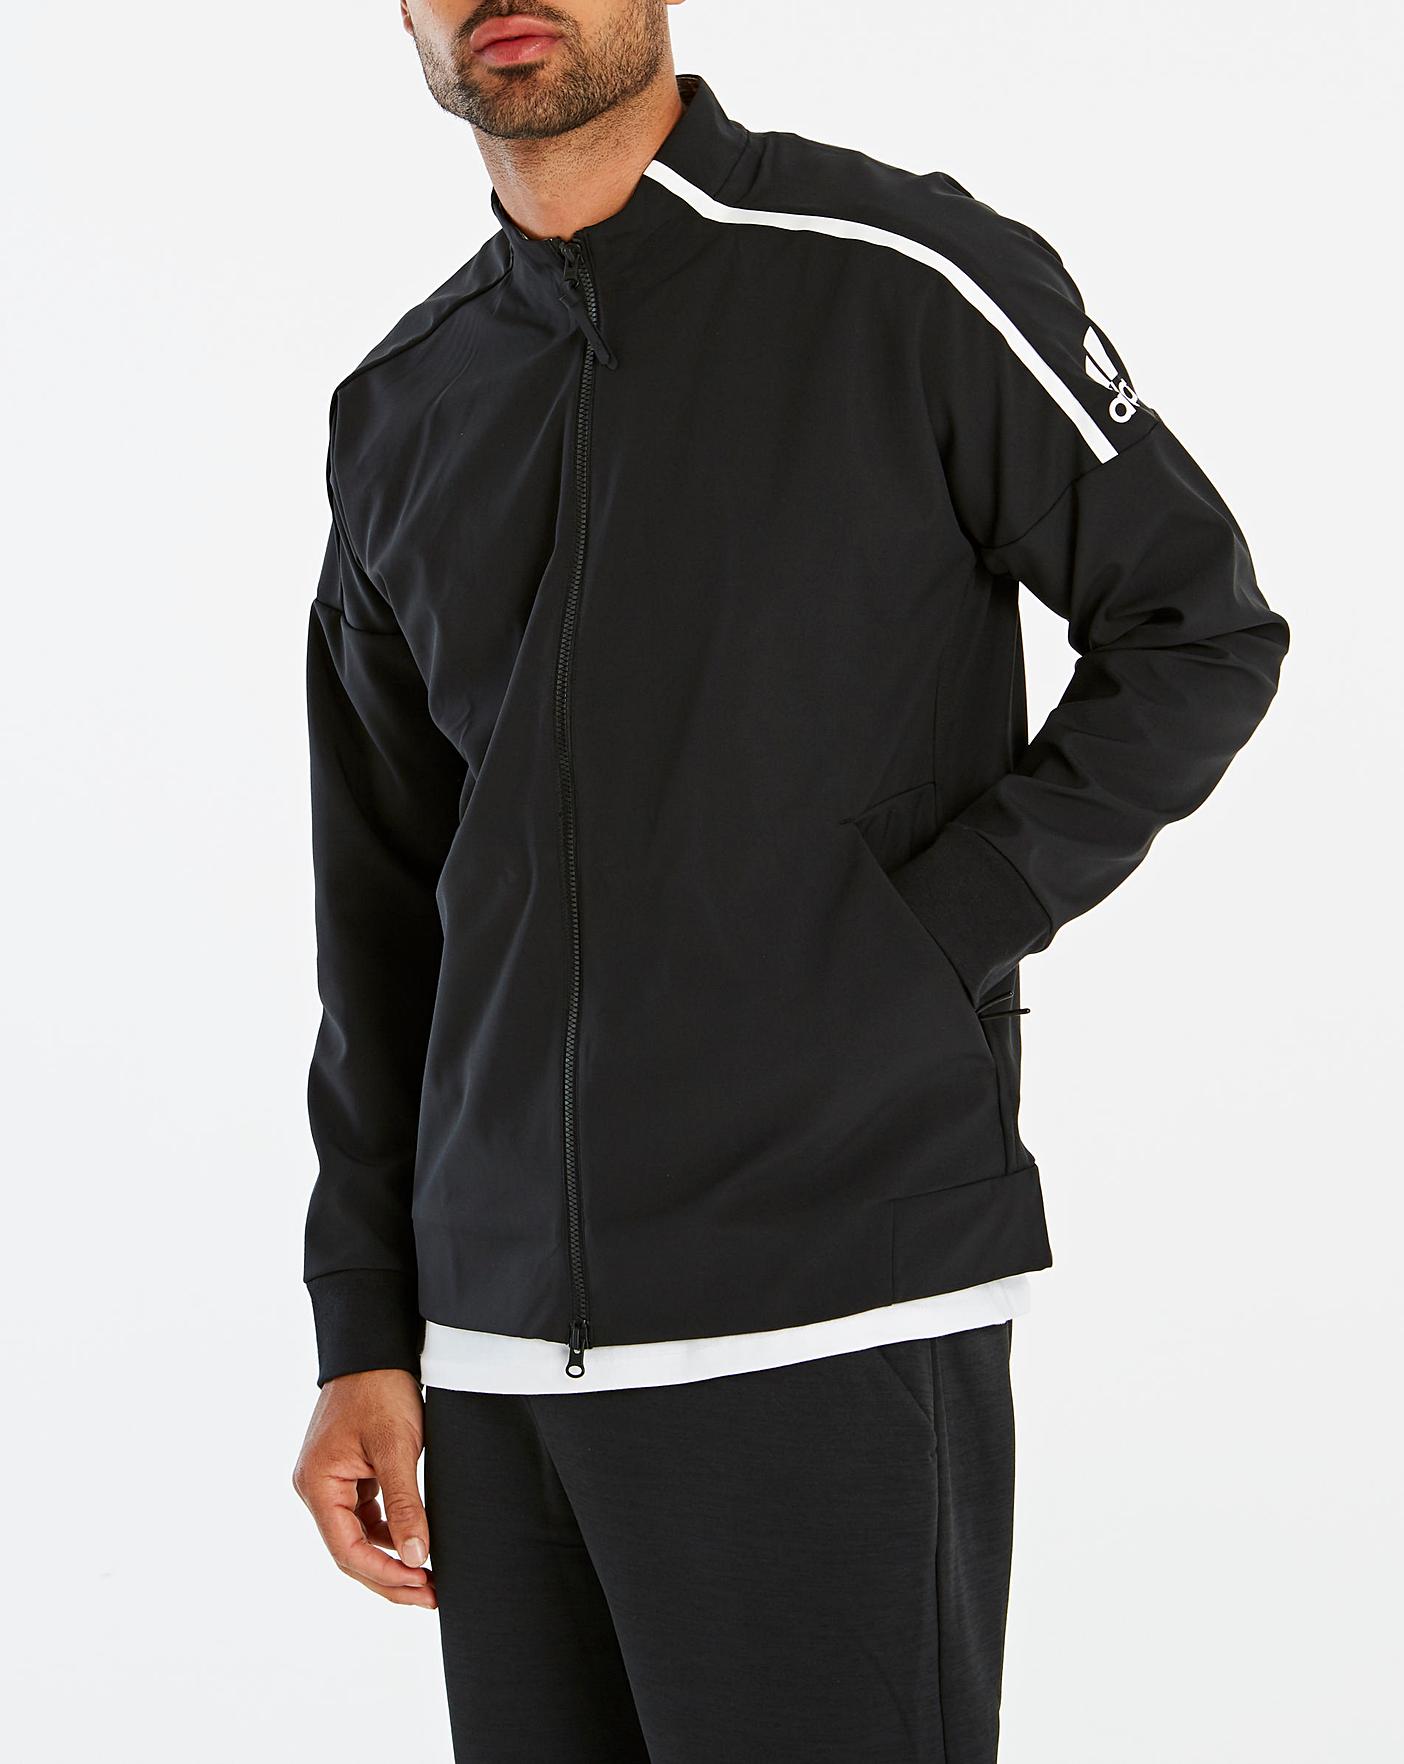 adidas Zne Woven Jacket. | Oxendales